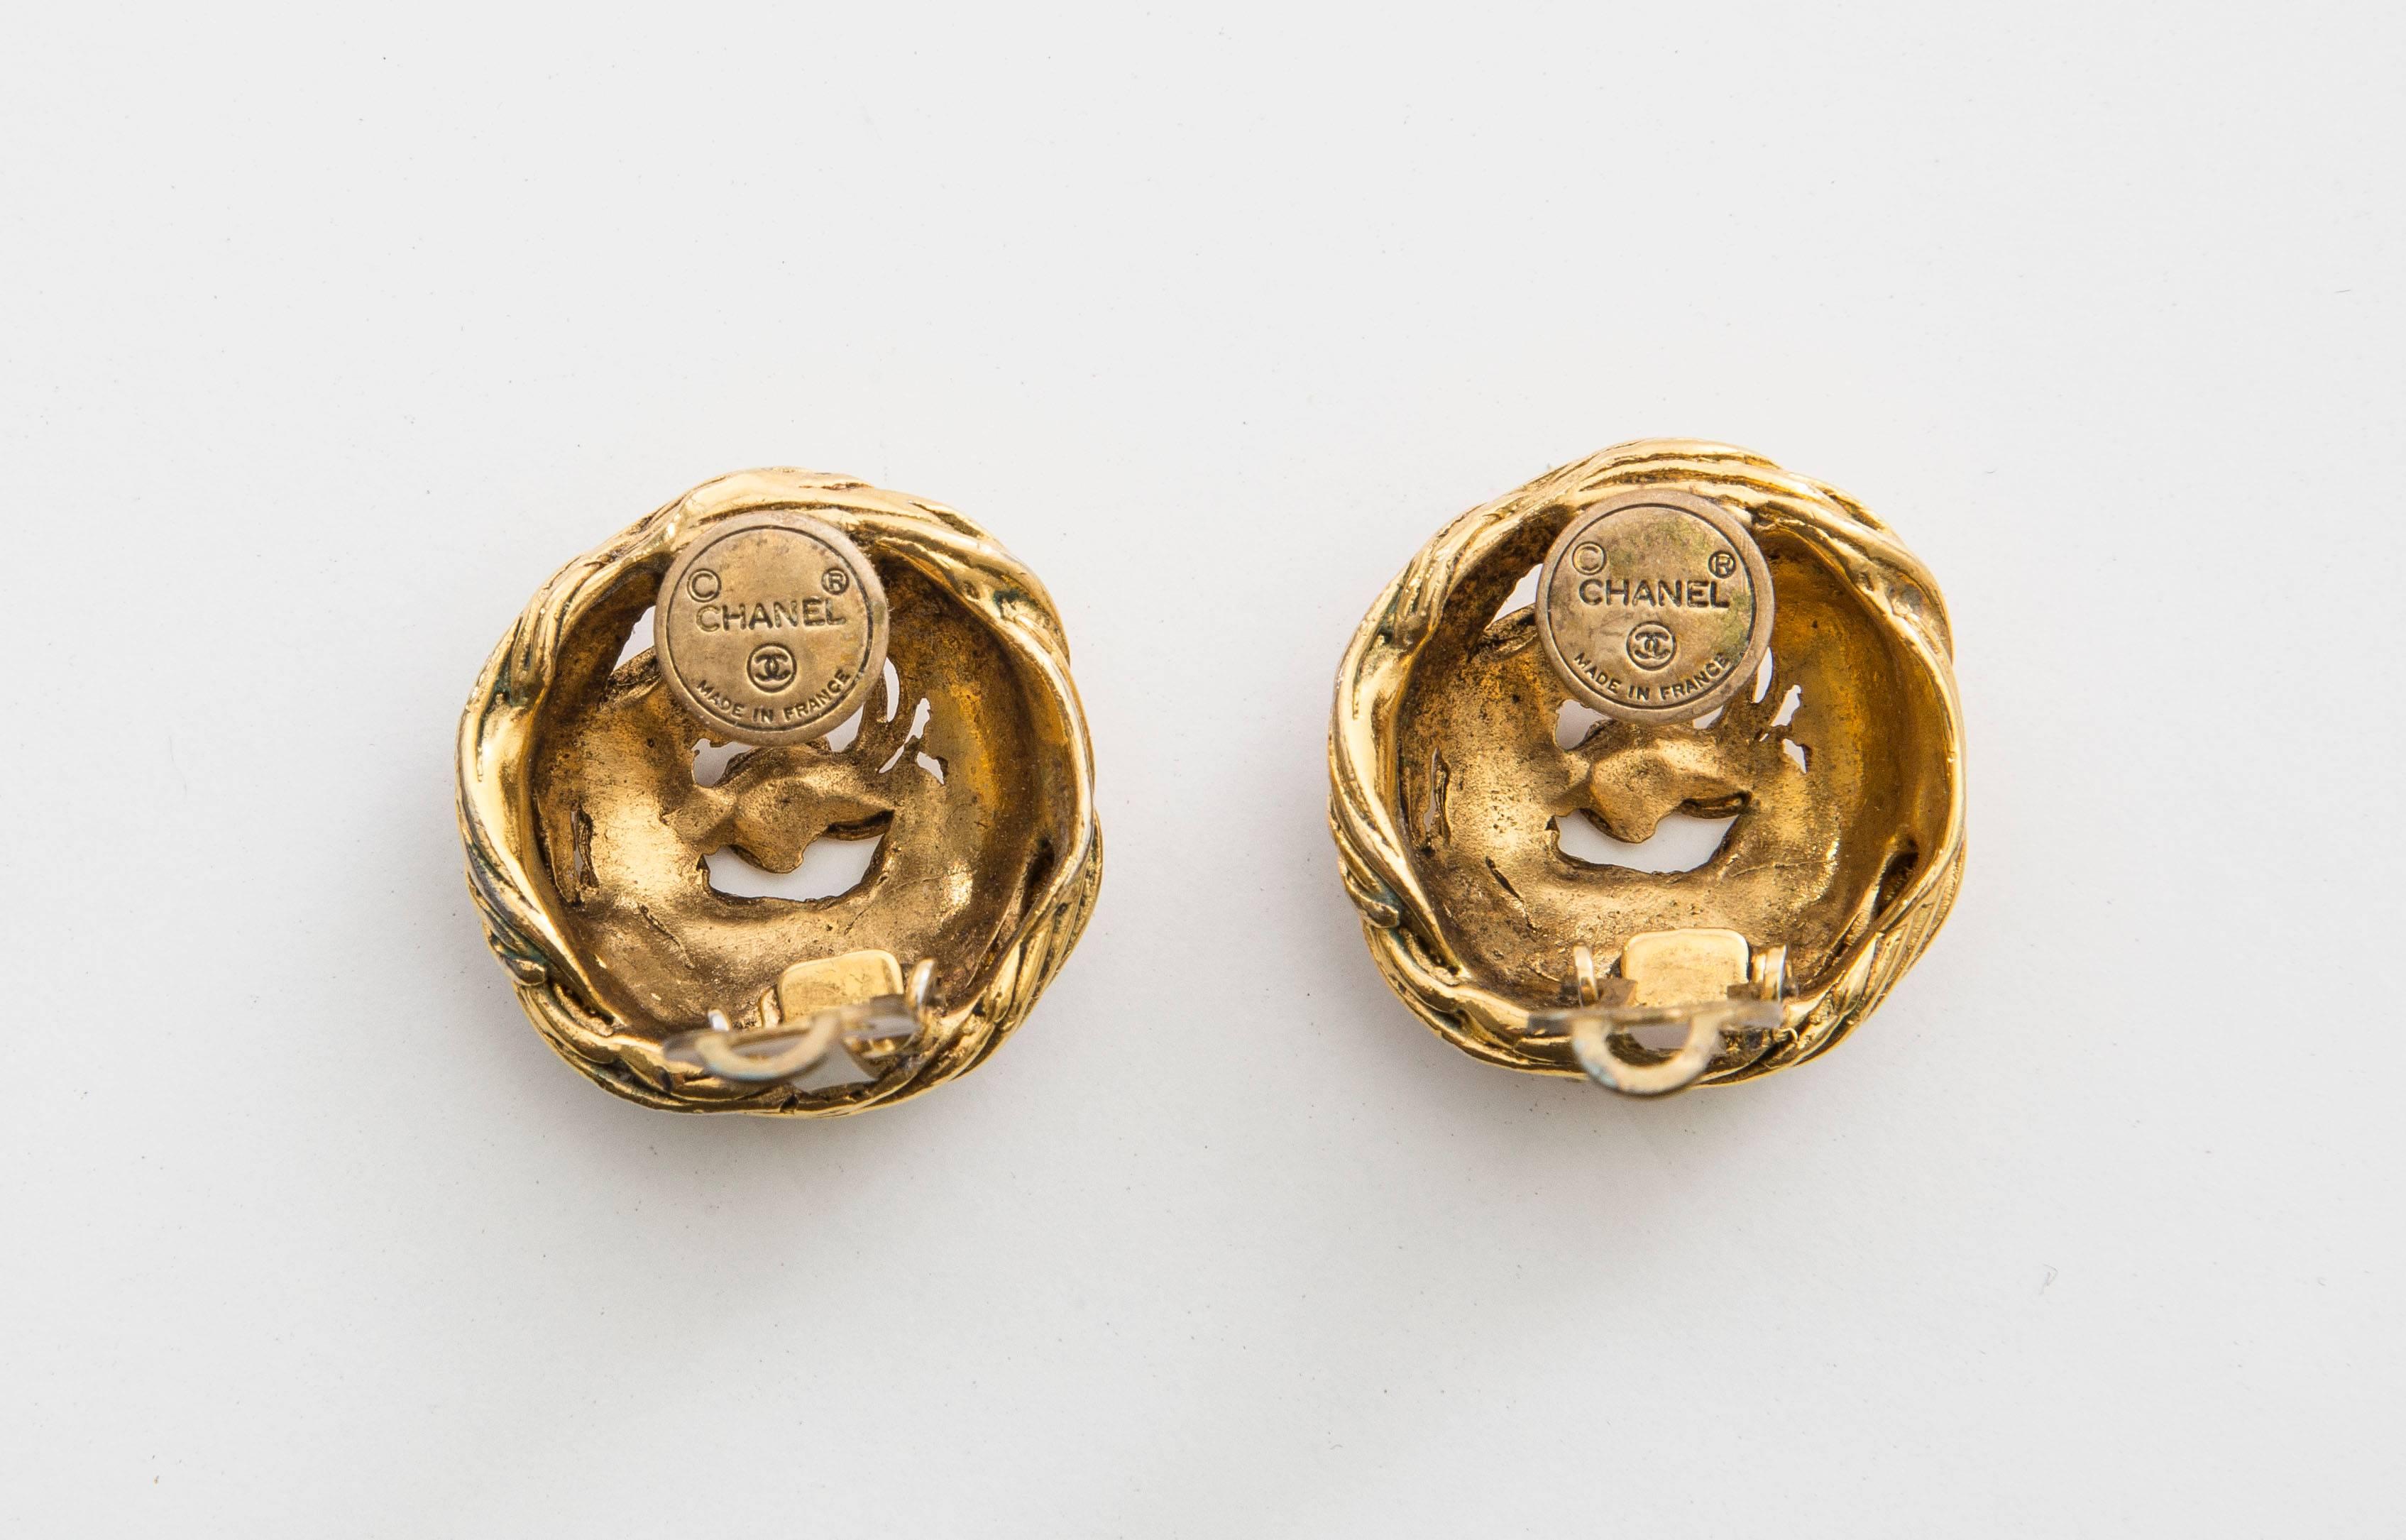 Chanel, circa 1970's gold-tone, clip-on earrings.